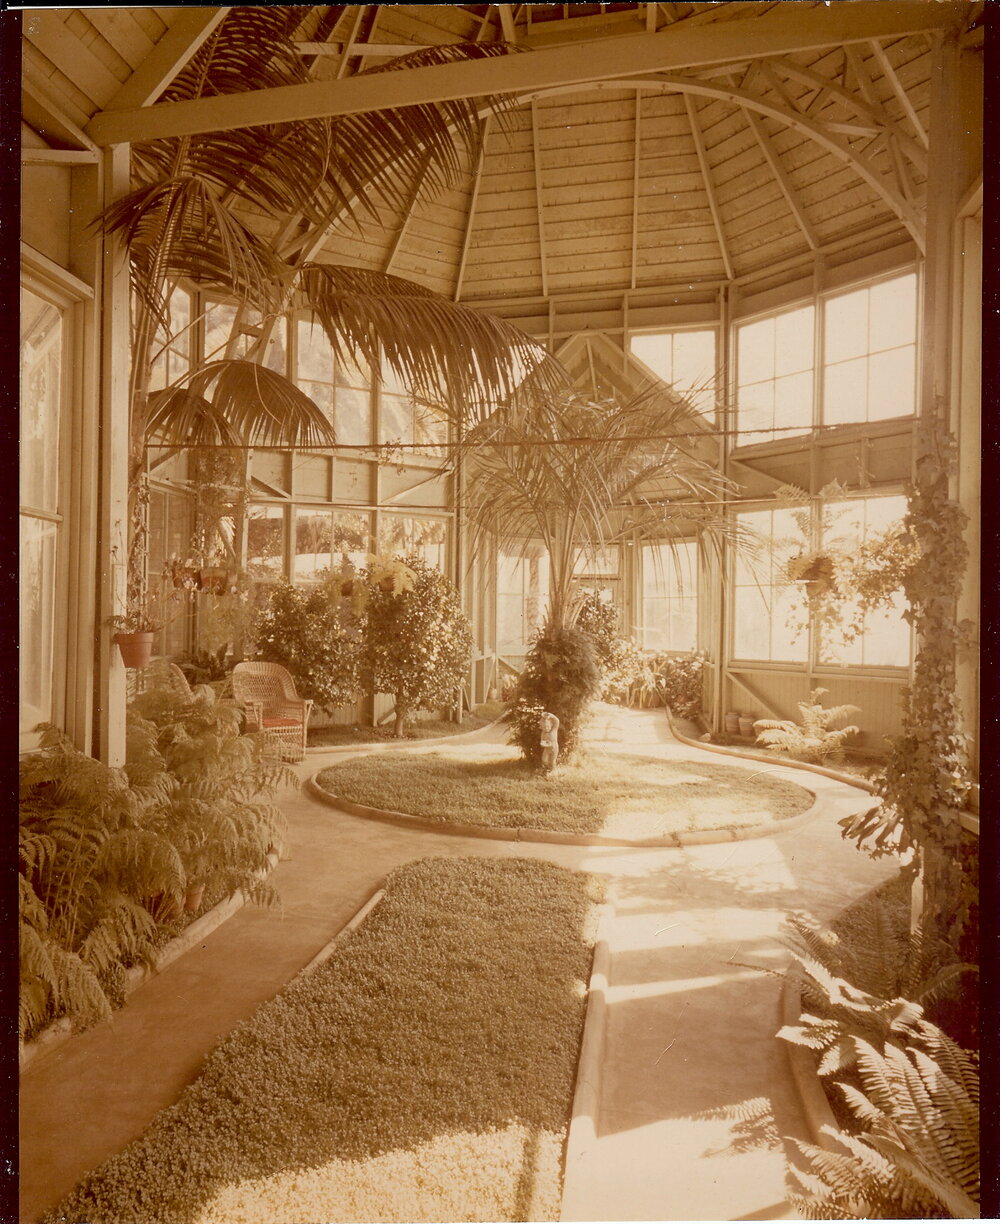 Sunnyside Conservatory Interior with East Wing.jpg